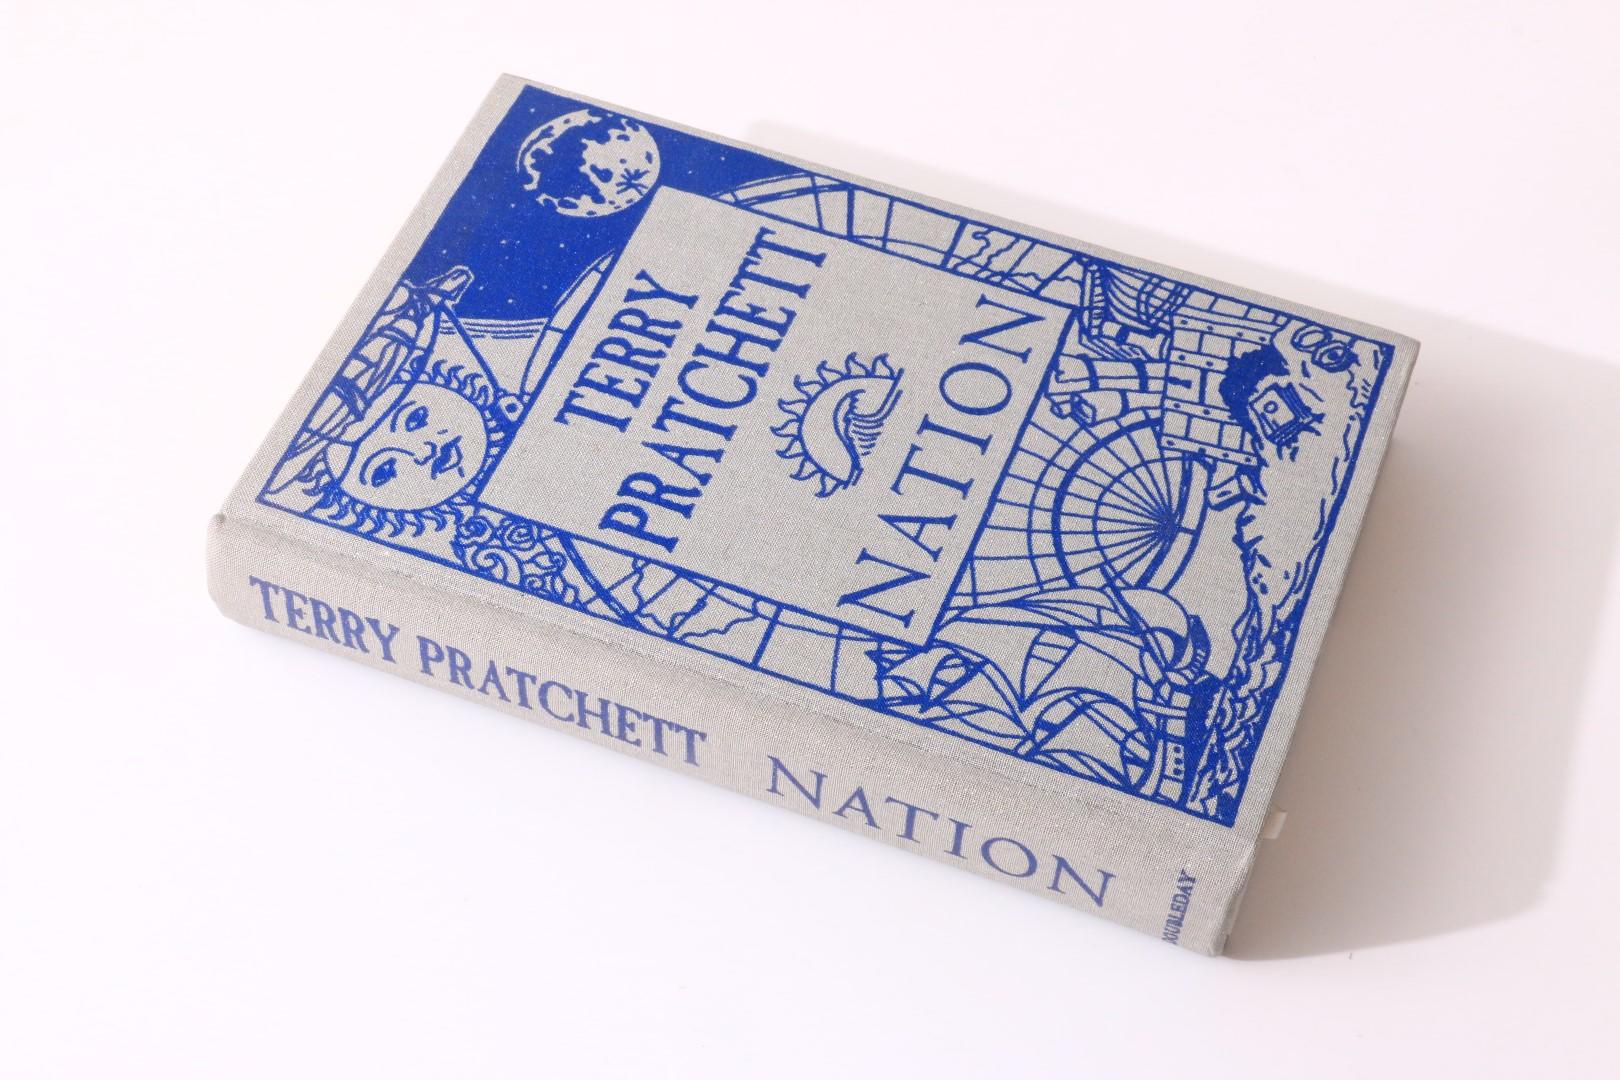 Terry Pratchett - Nation - Doubleday, 2008, Signed Limited Edition.